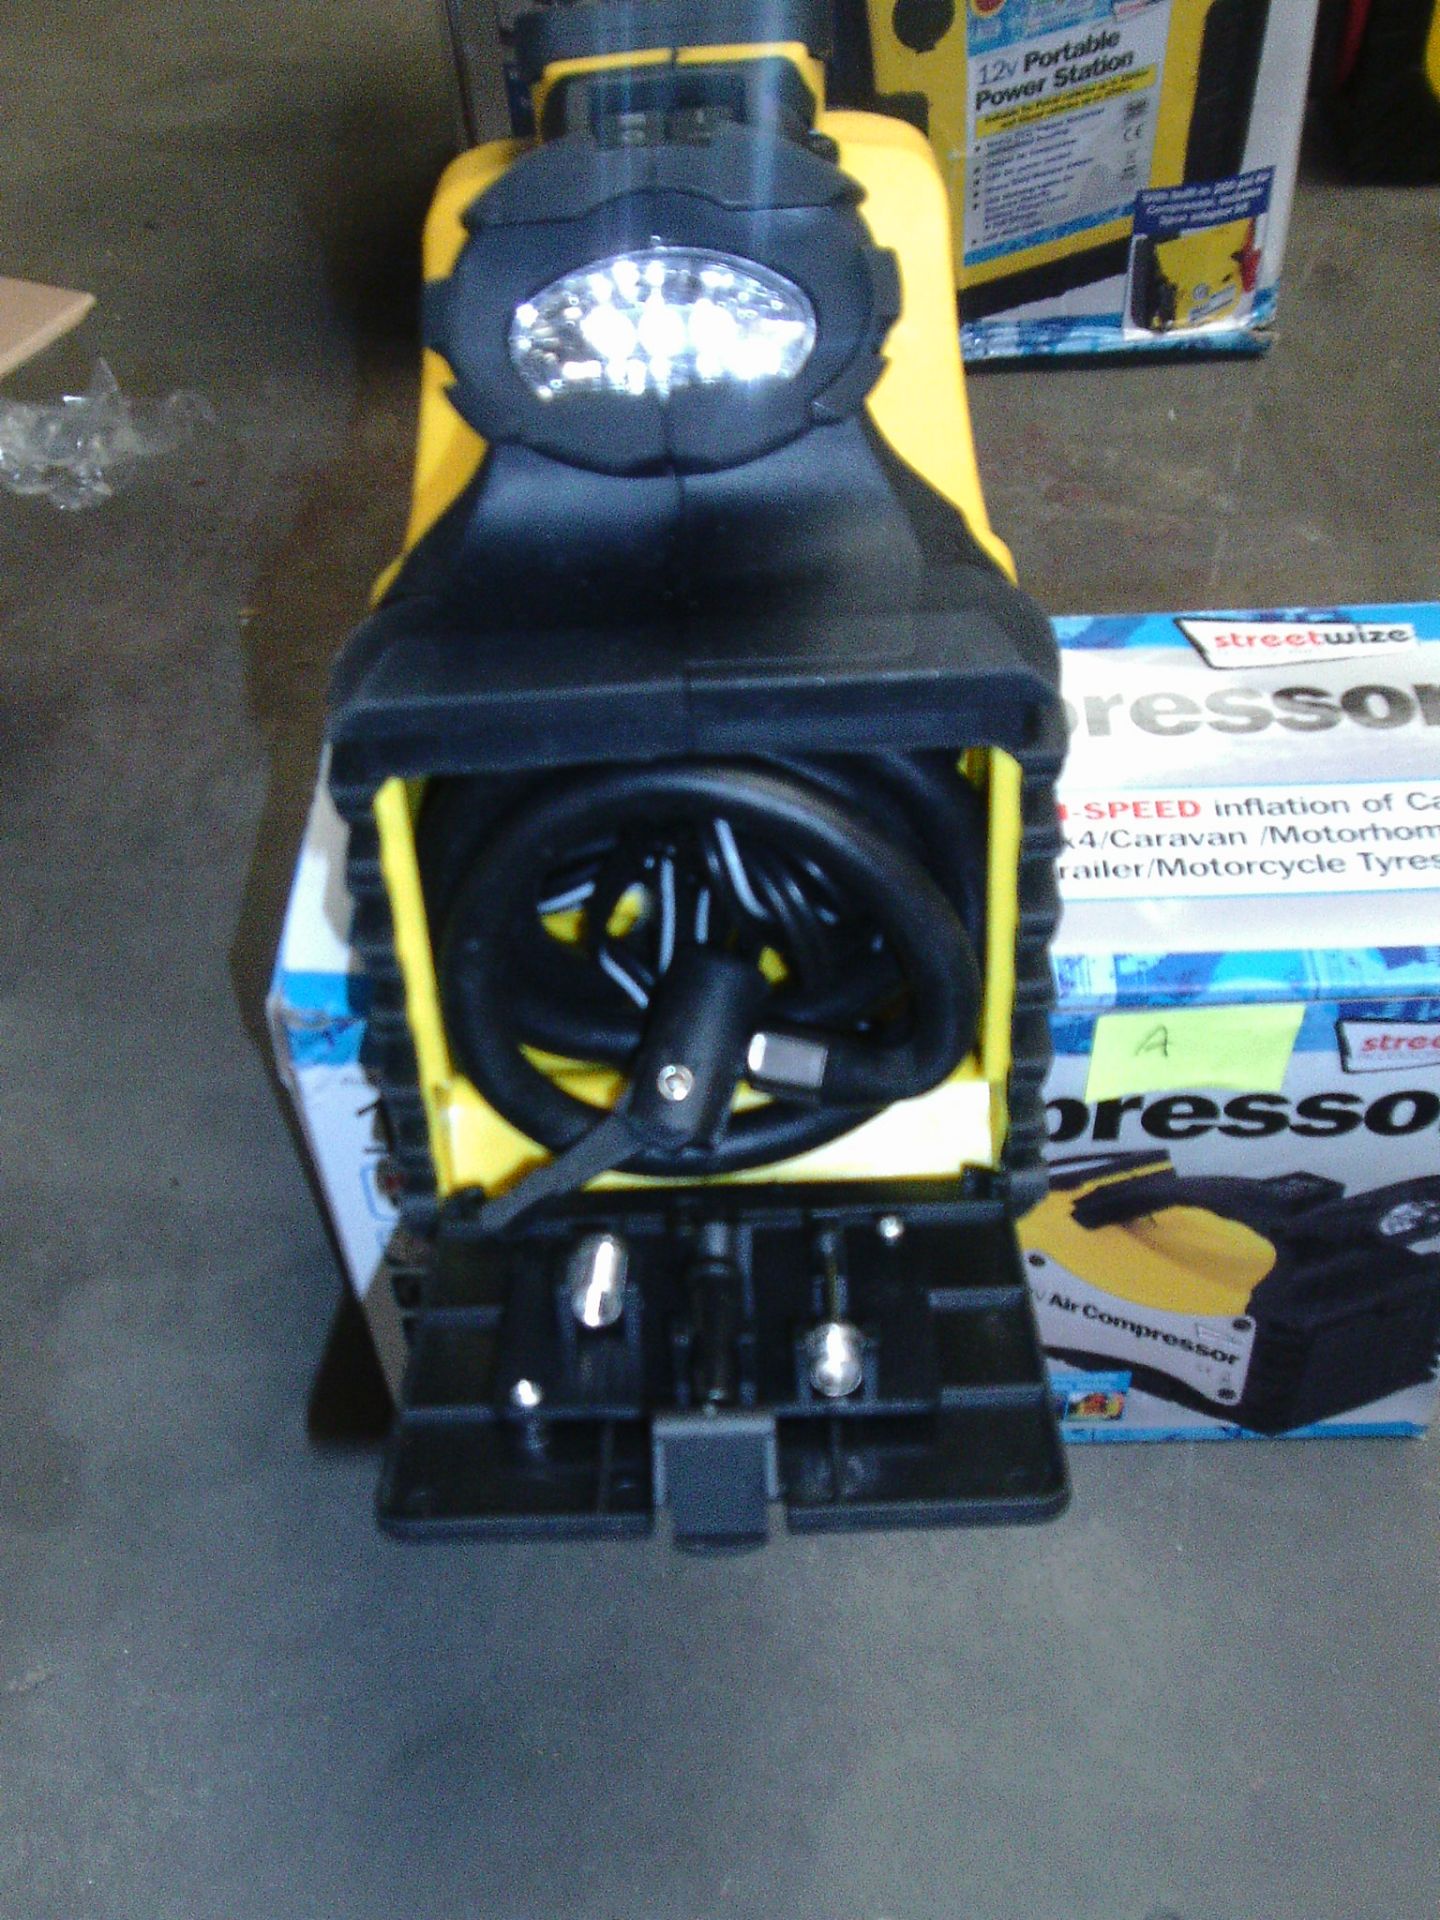 Boxed 12 V Air compressor - Impact resistant - Image 2 of 2